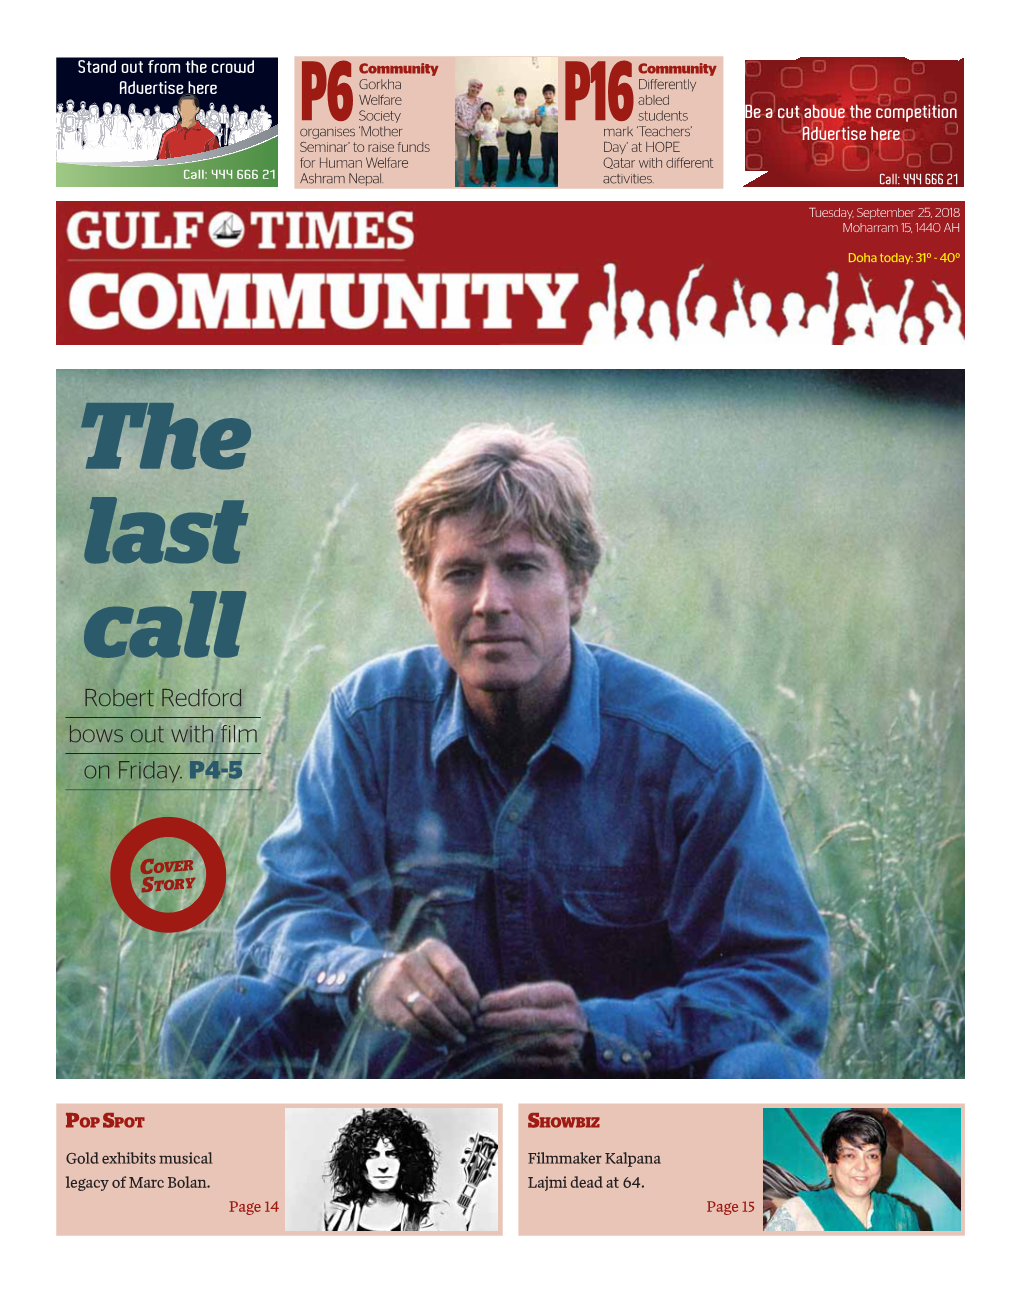 Robert Redford Bows out with Film on Friday. P4-5